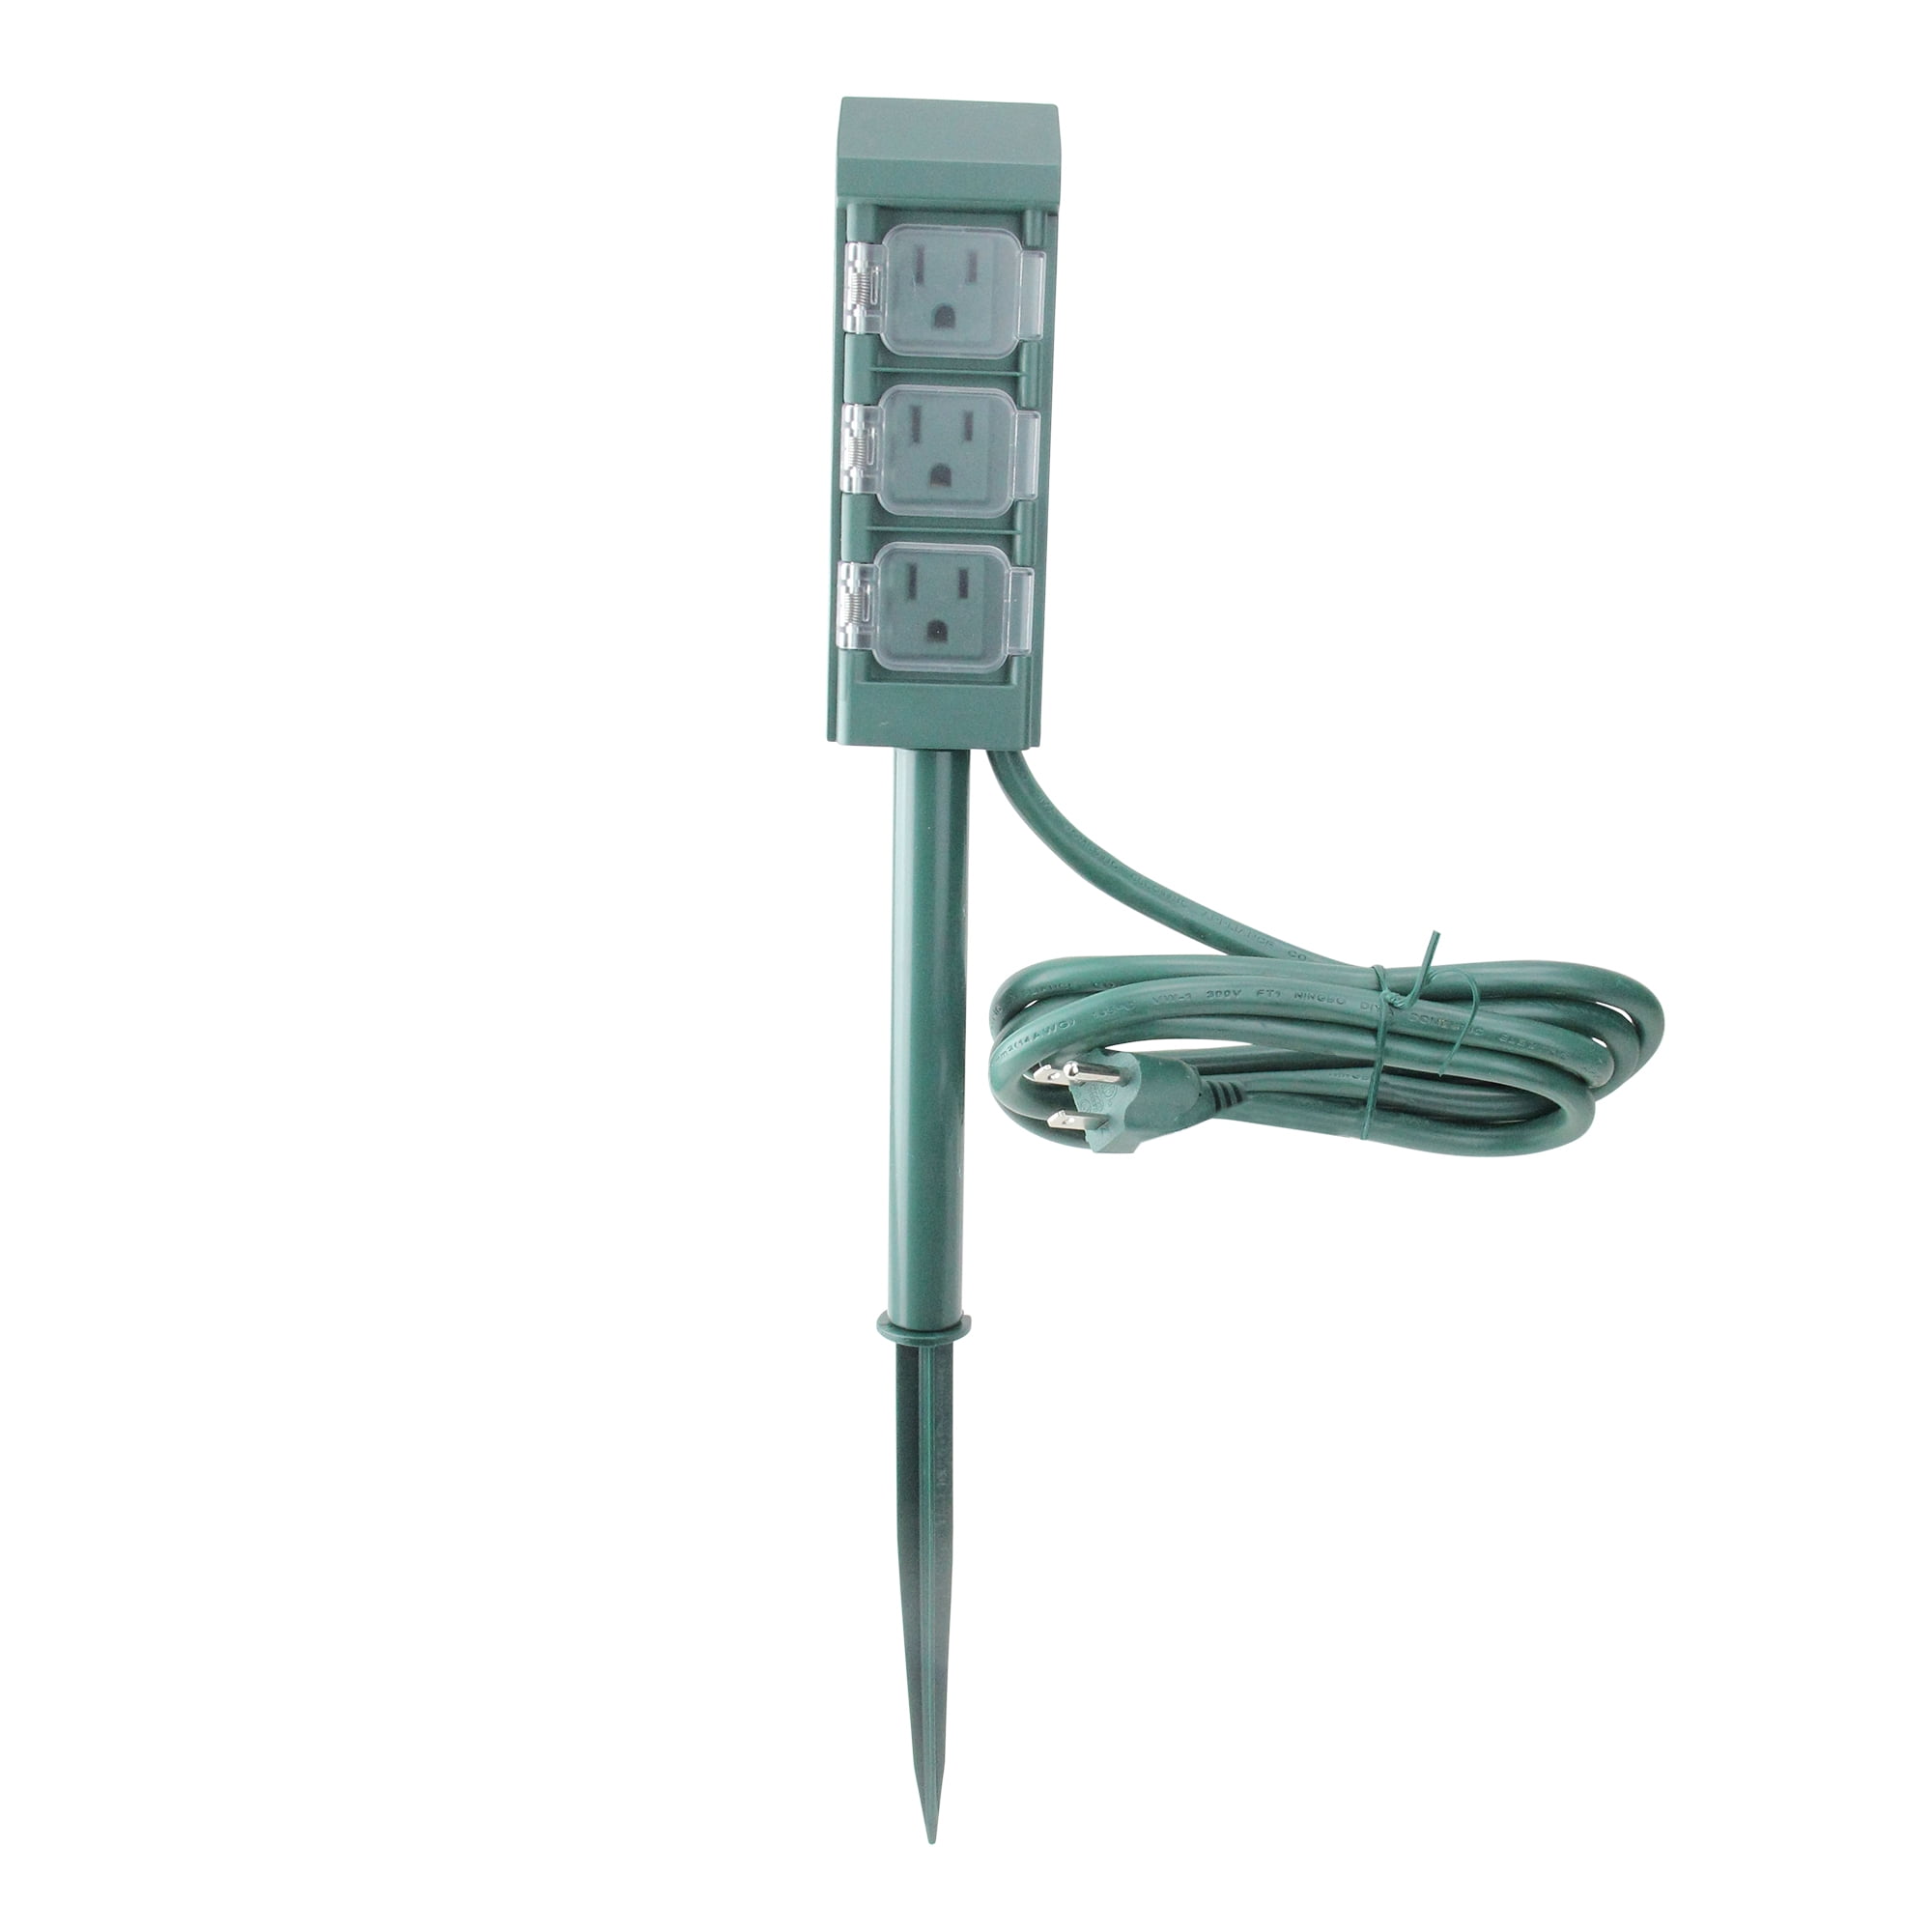 3 Outlet Stanley NEW Outdoor Plug Bank Mini / Yard Stake 